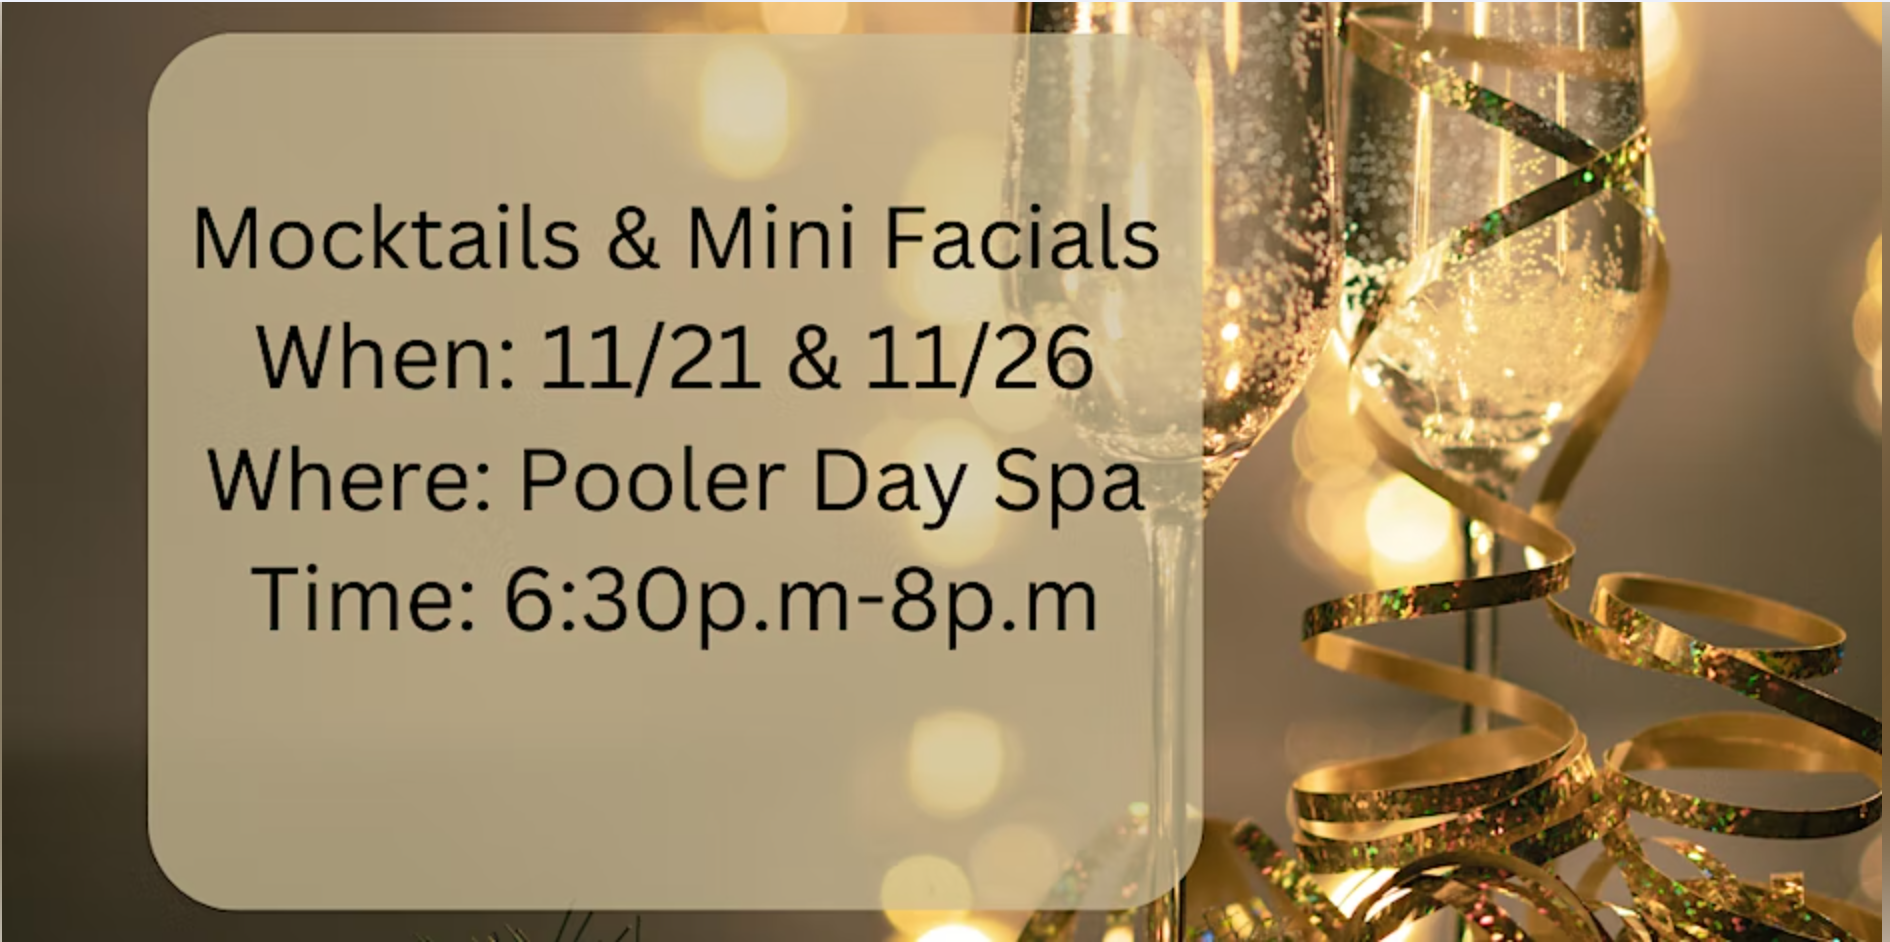 Pooler Day Spa